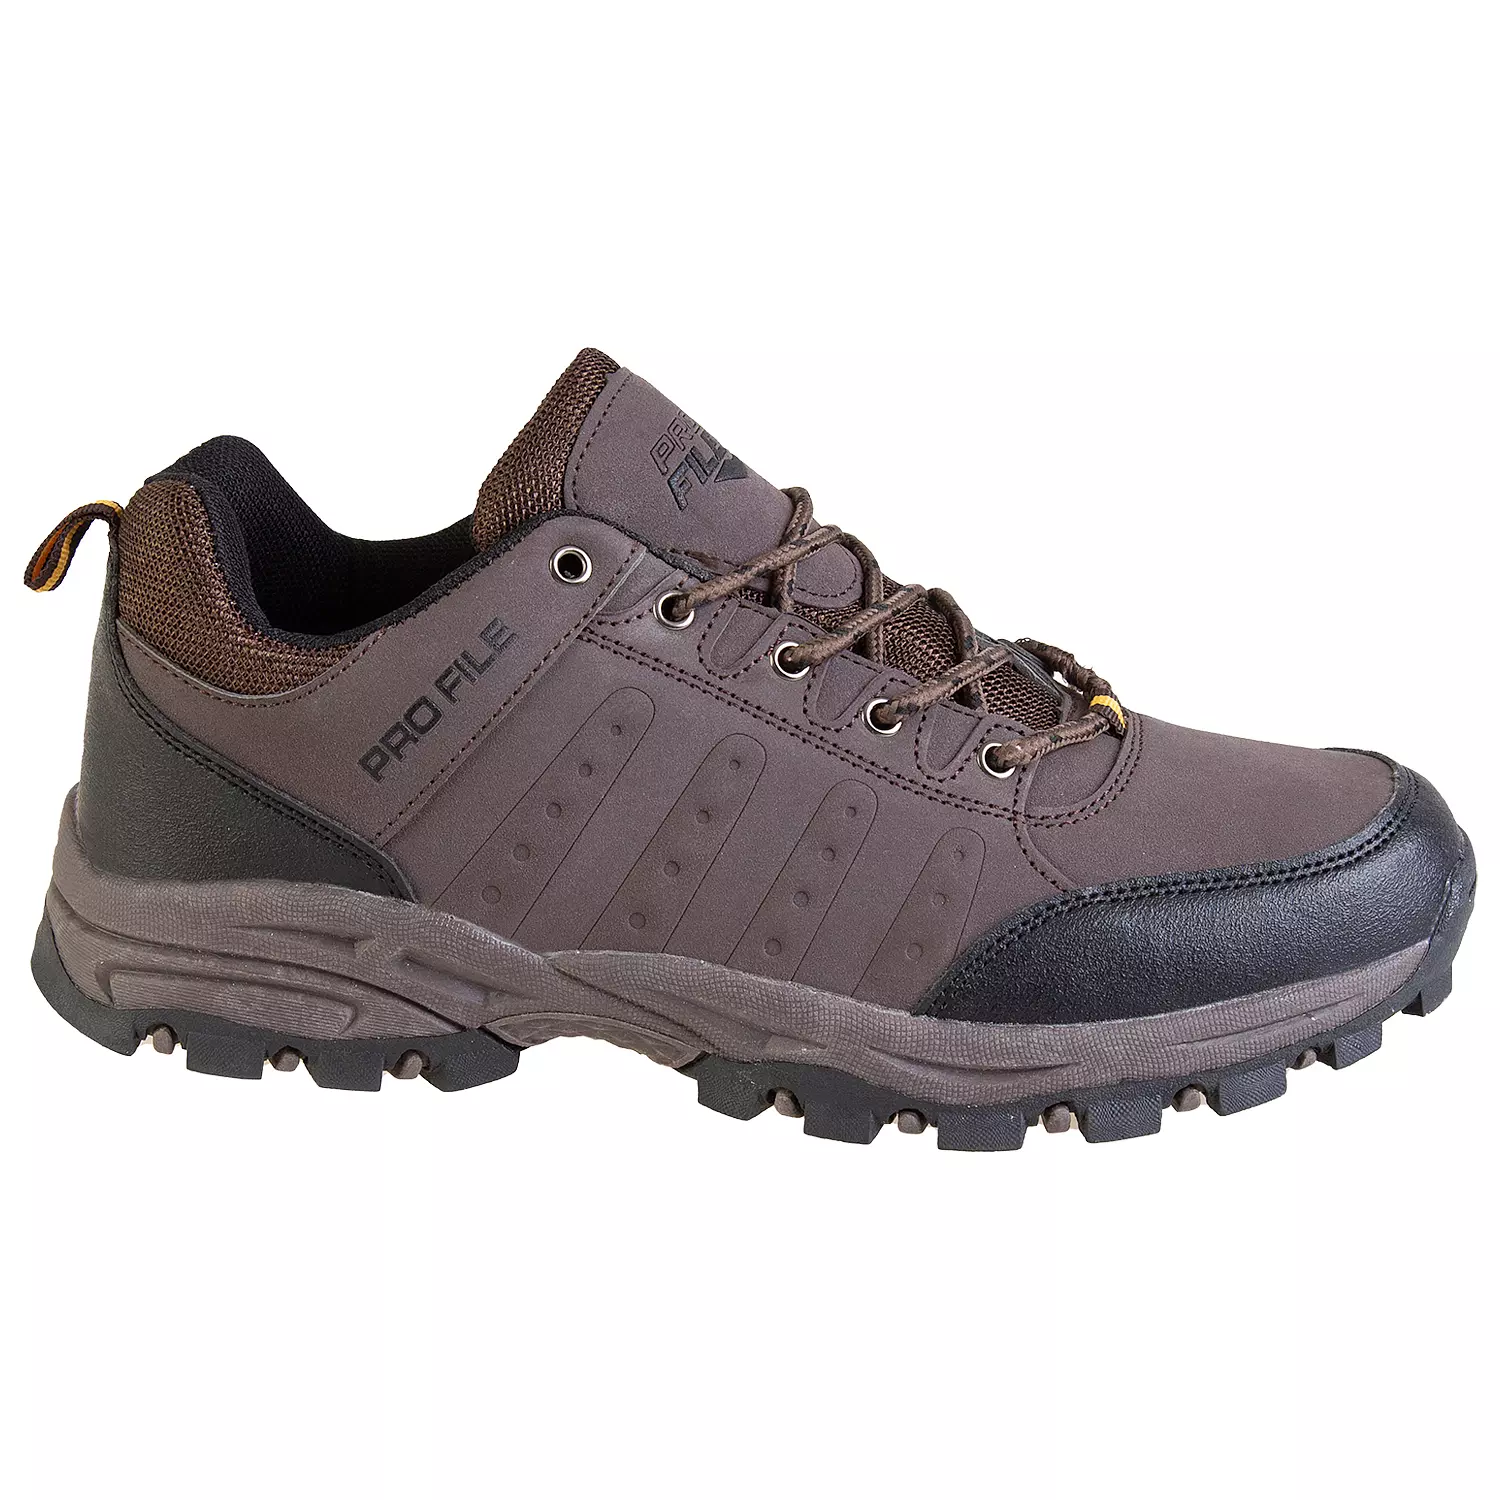 Men's 2-toned, lace-up hiking shoes, brown, size 12